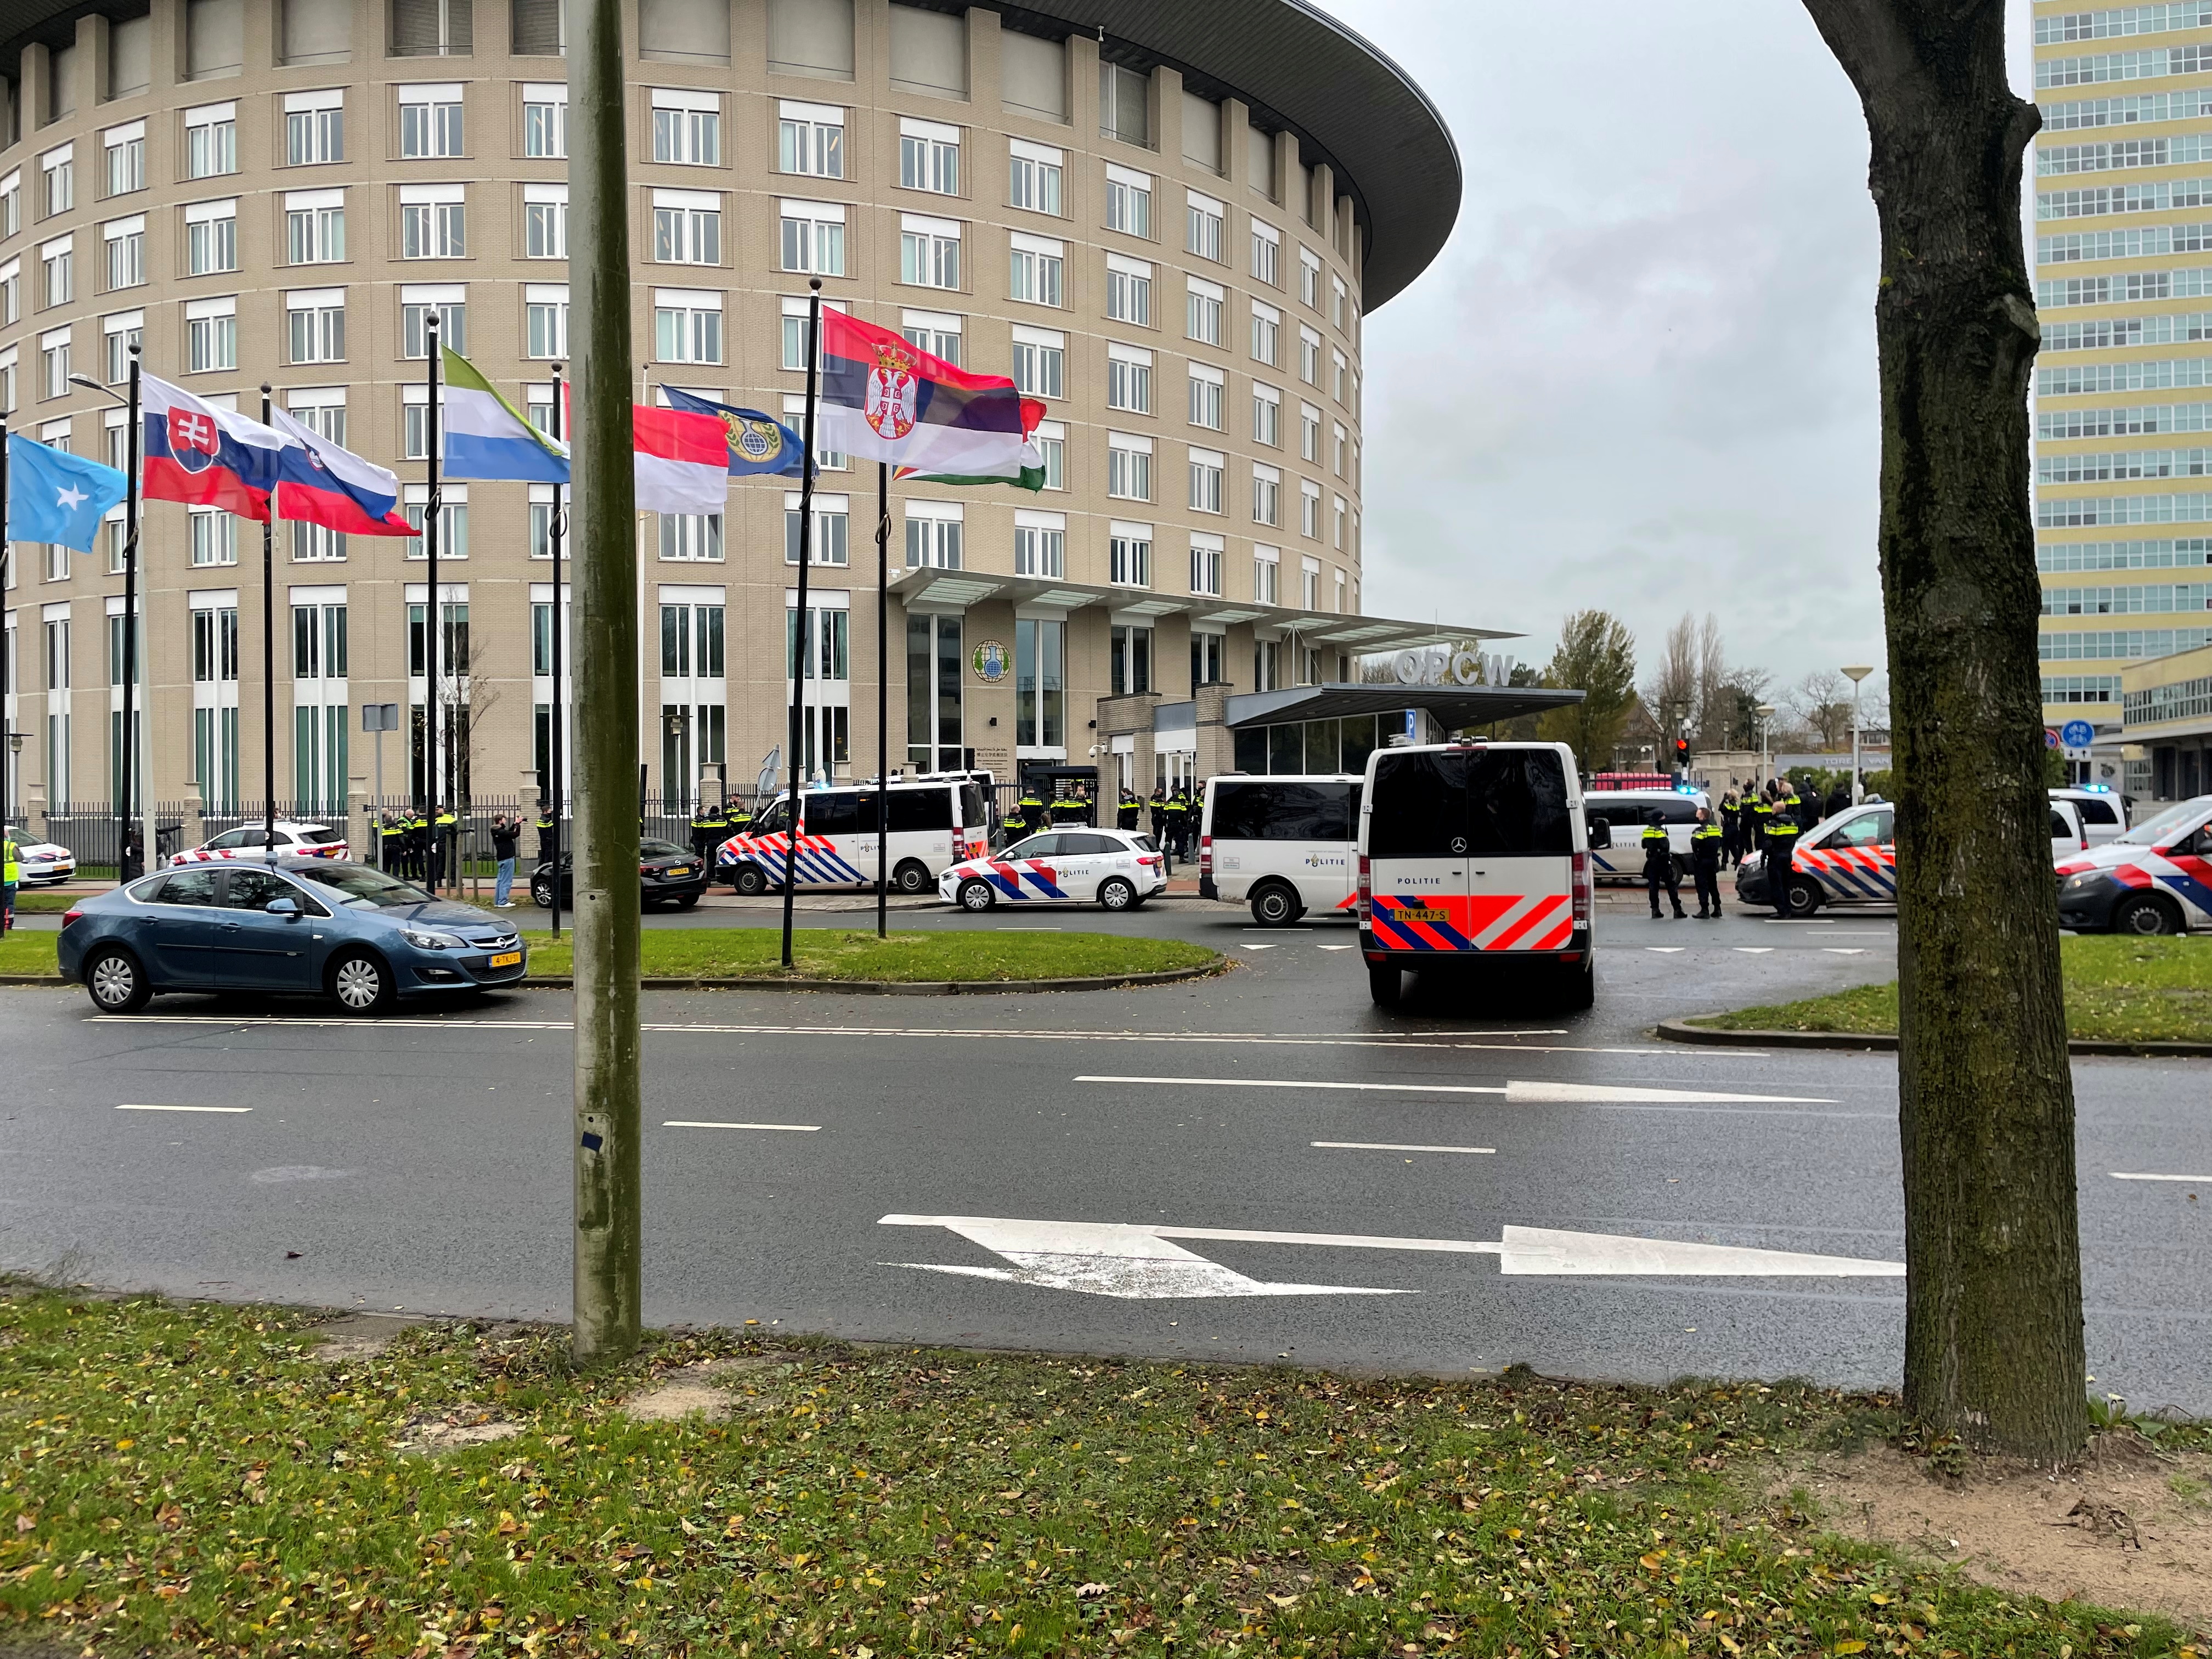 Police officers stand outside the building of the Organisation for the Prohibition of Chemical Weapons (OPCW) in The Hague, Netherlands December 3, 2021 in this image obtained from social media. Courtesy of Twitter/DaveKlain/via REUTERS THIS IMAGE HAS BEEN SUPPLIED BY A THIRD PARTY. MANDATORY CREDIT. NO RESALES. NO ARCHIVES.